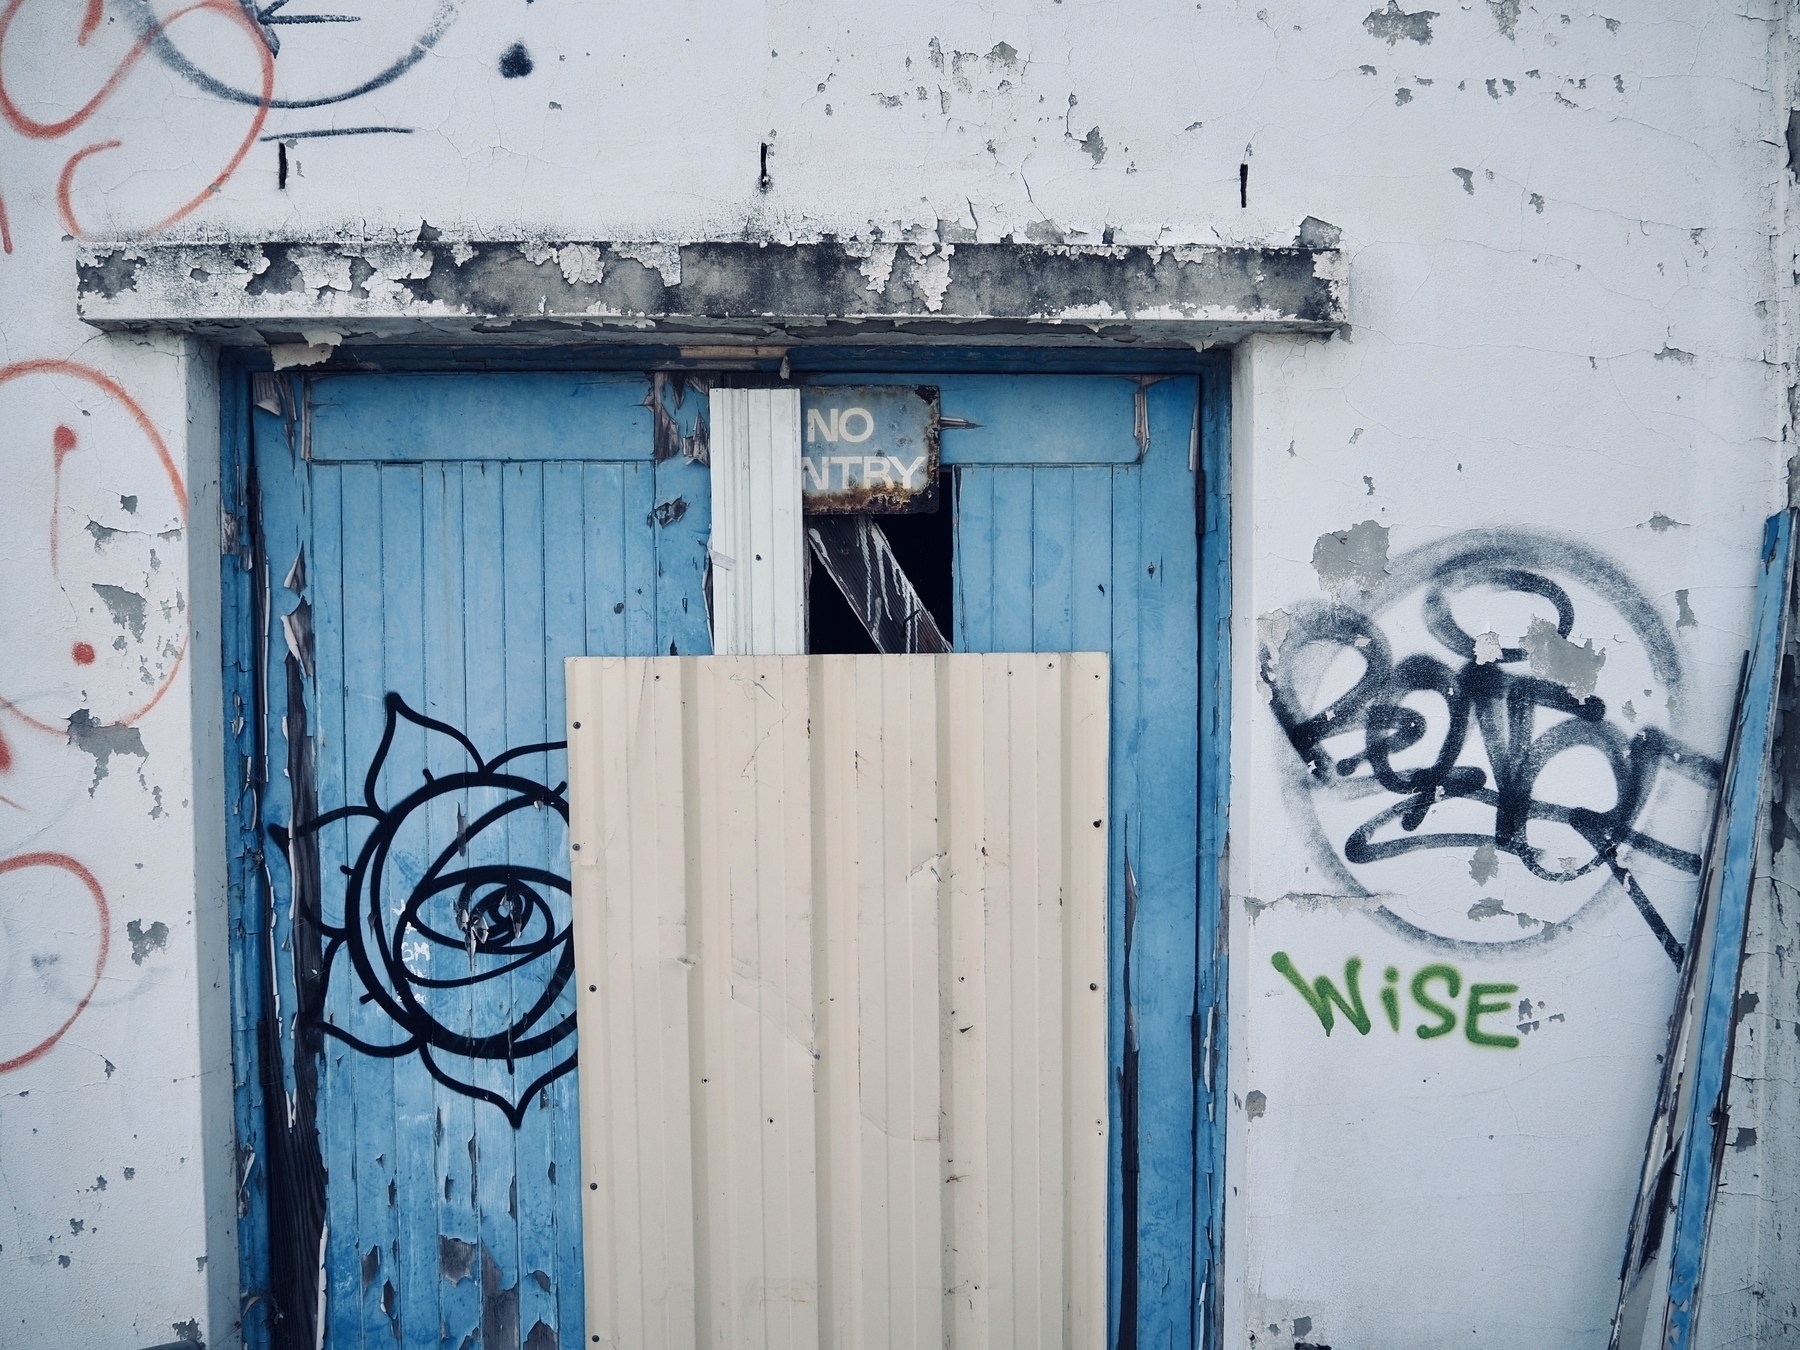 A boarded-up doorway with a sign that says 'No entry'